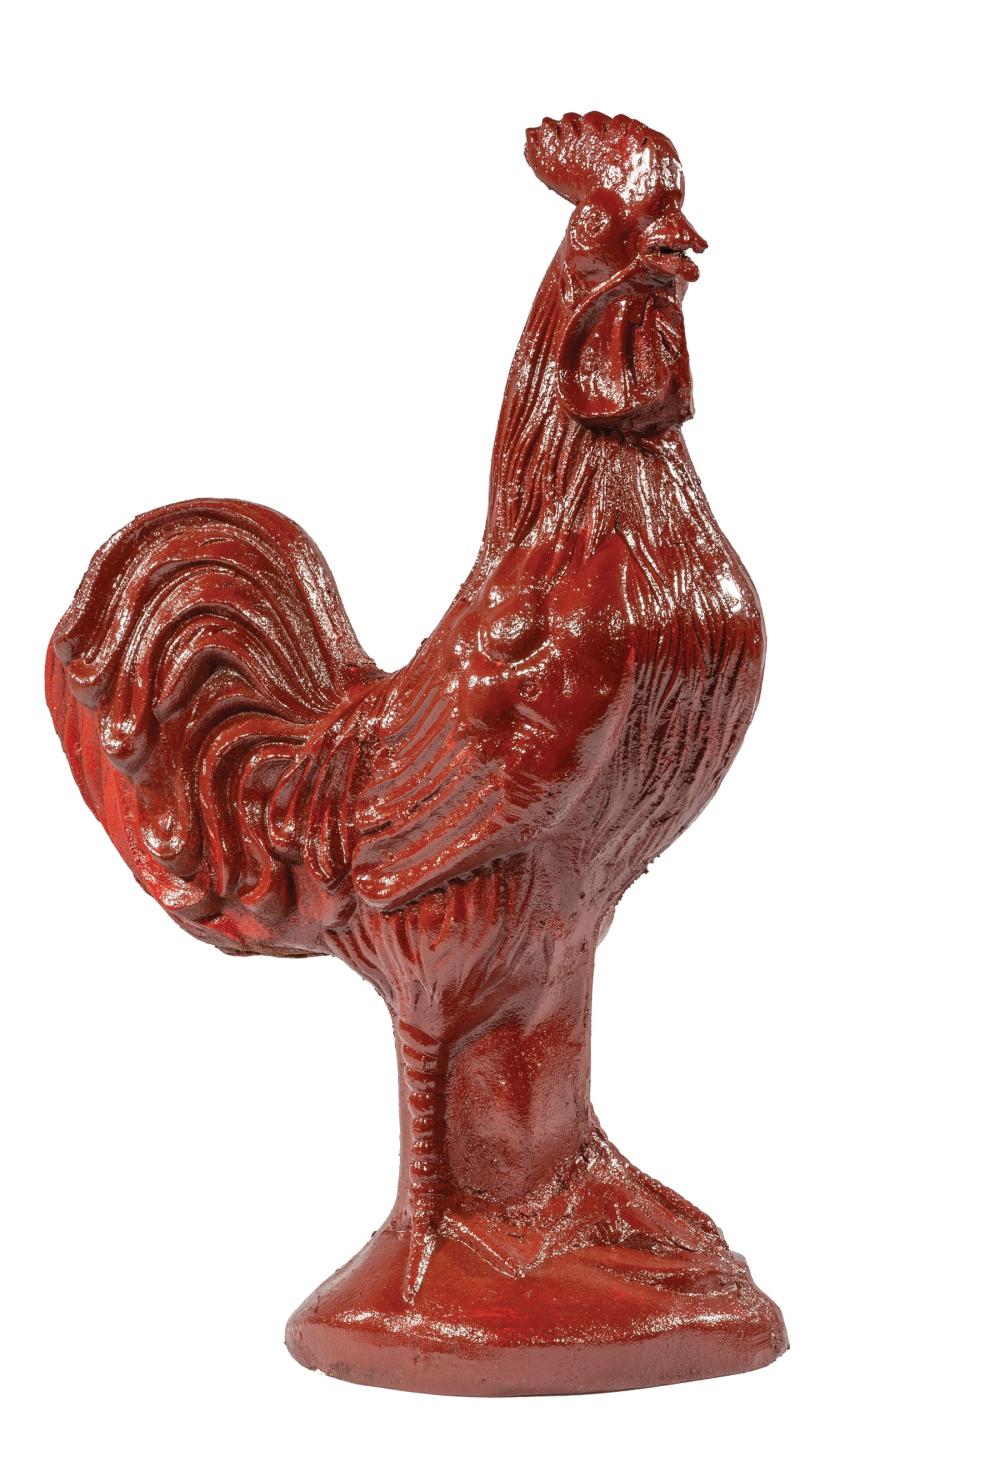 CAST IRON GARDEN FIGURE OF A ROOSTERCast 31c384